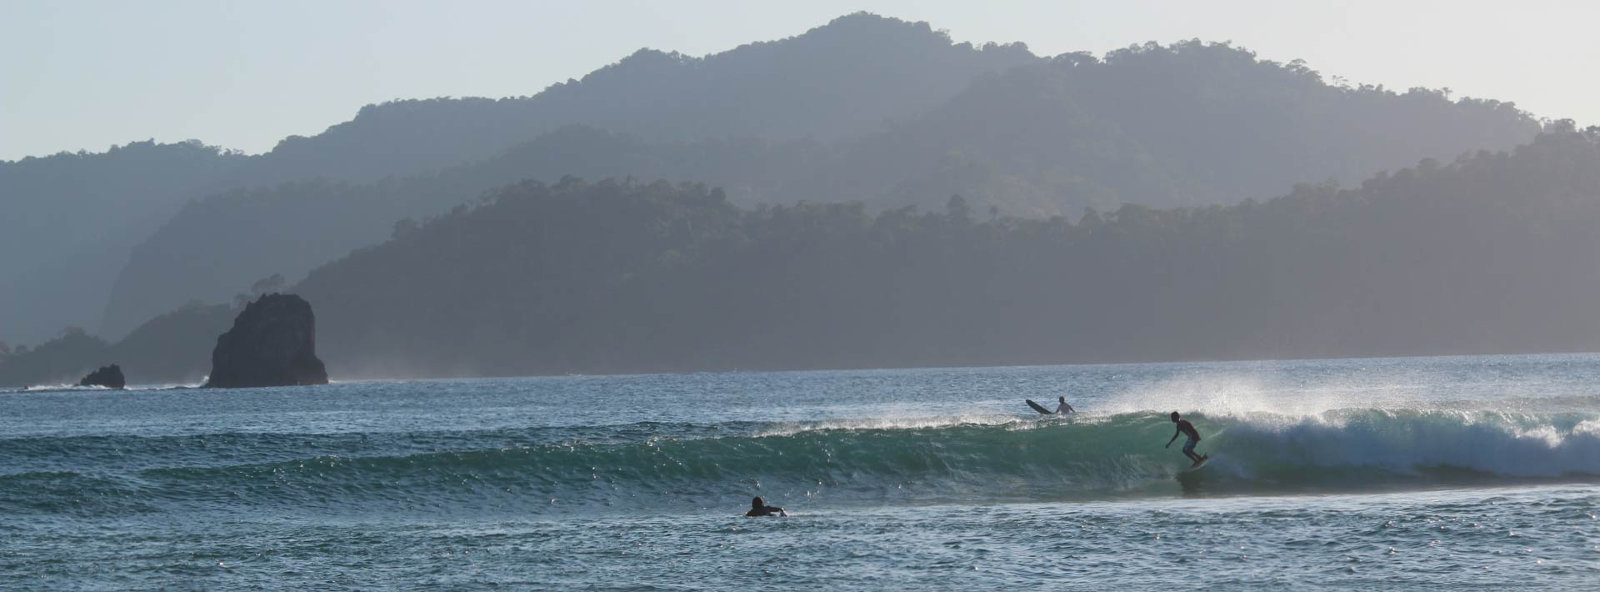 Beginner level surf coaching camp in Indonesia.